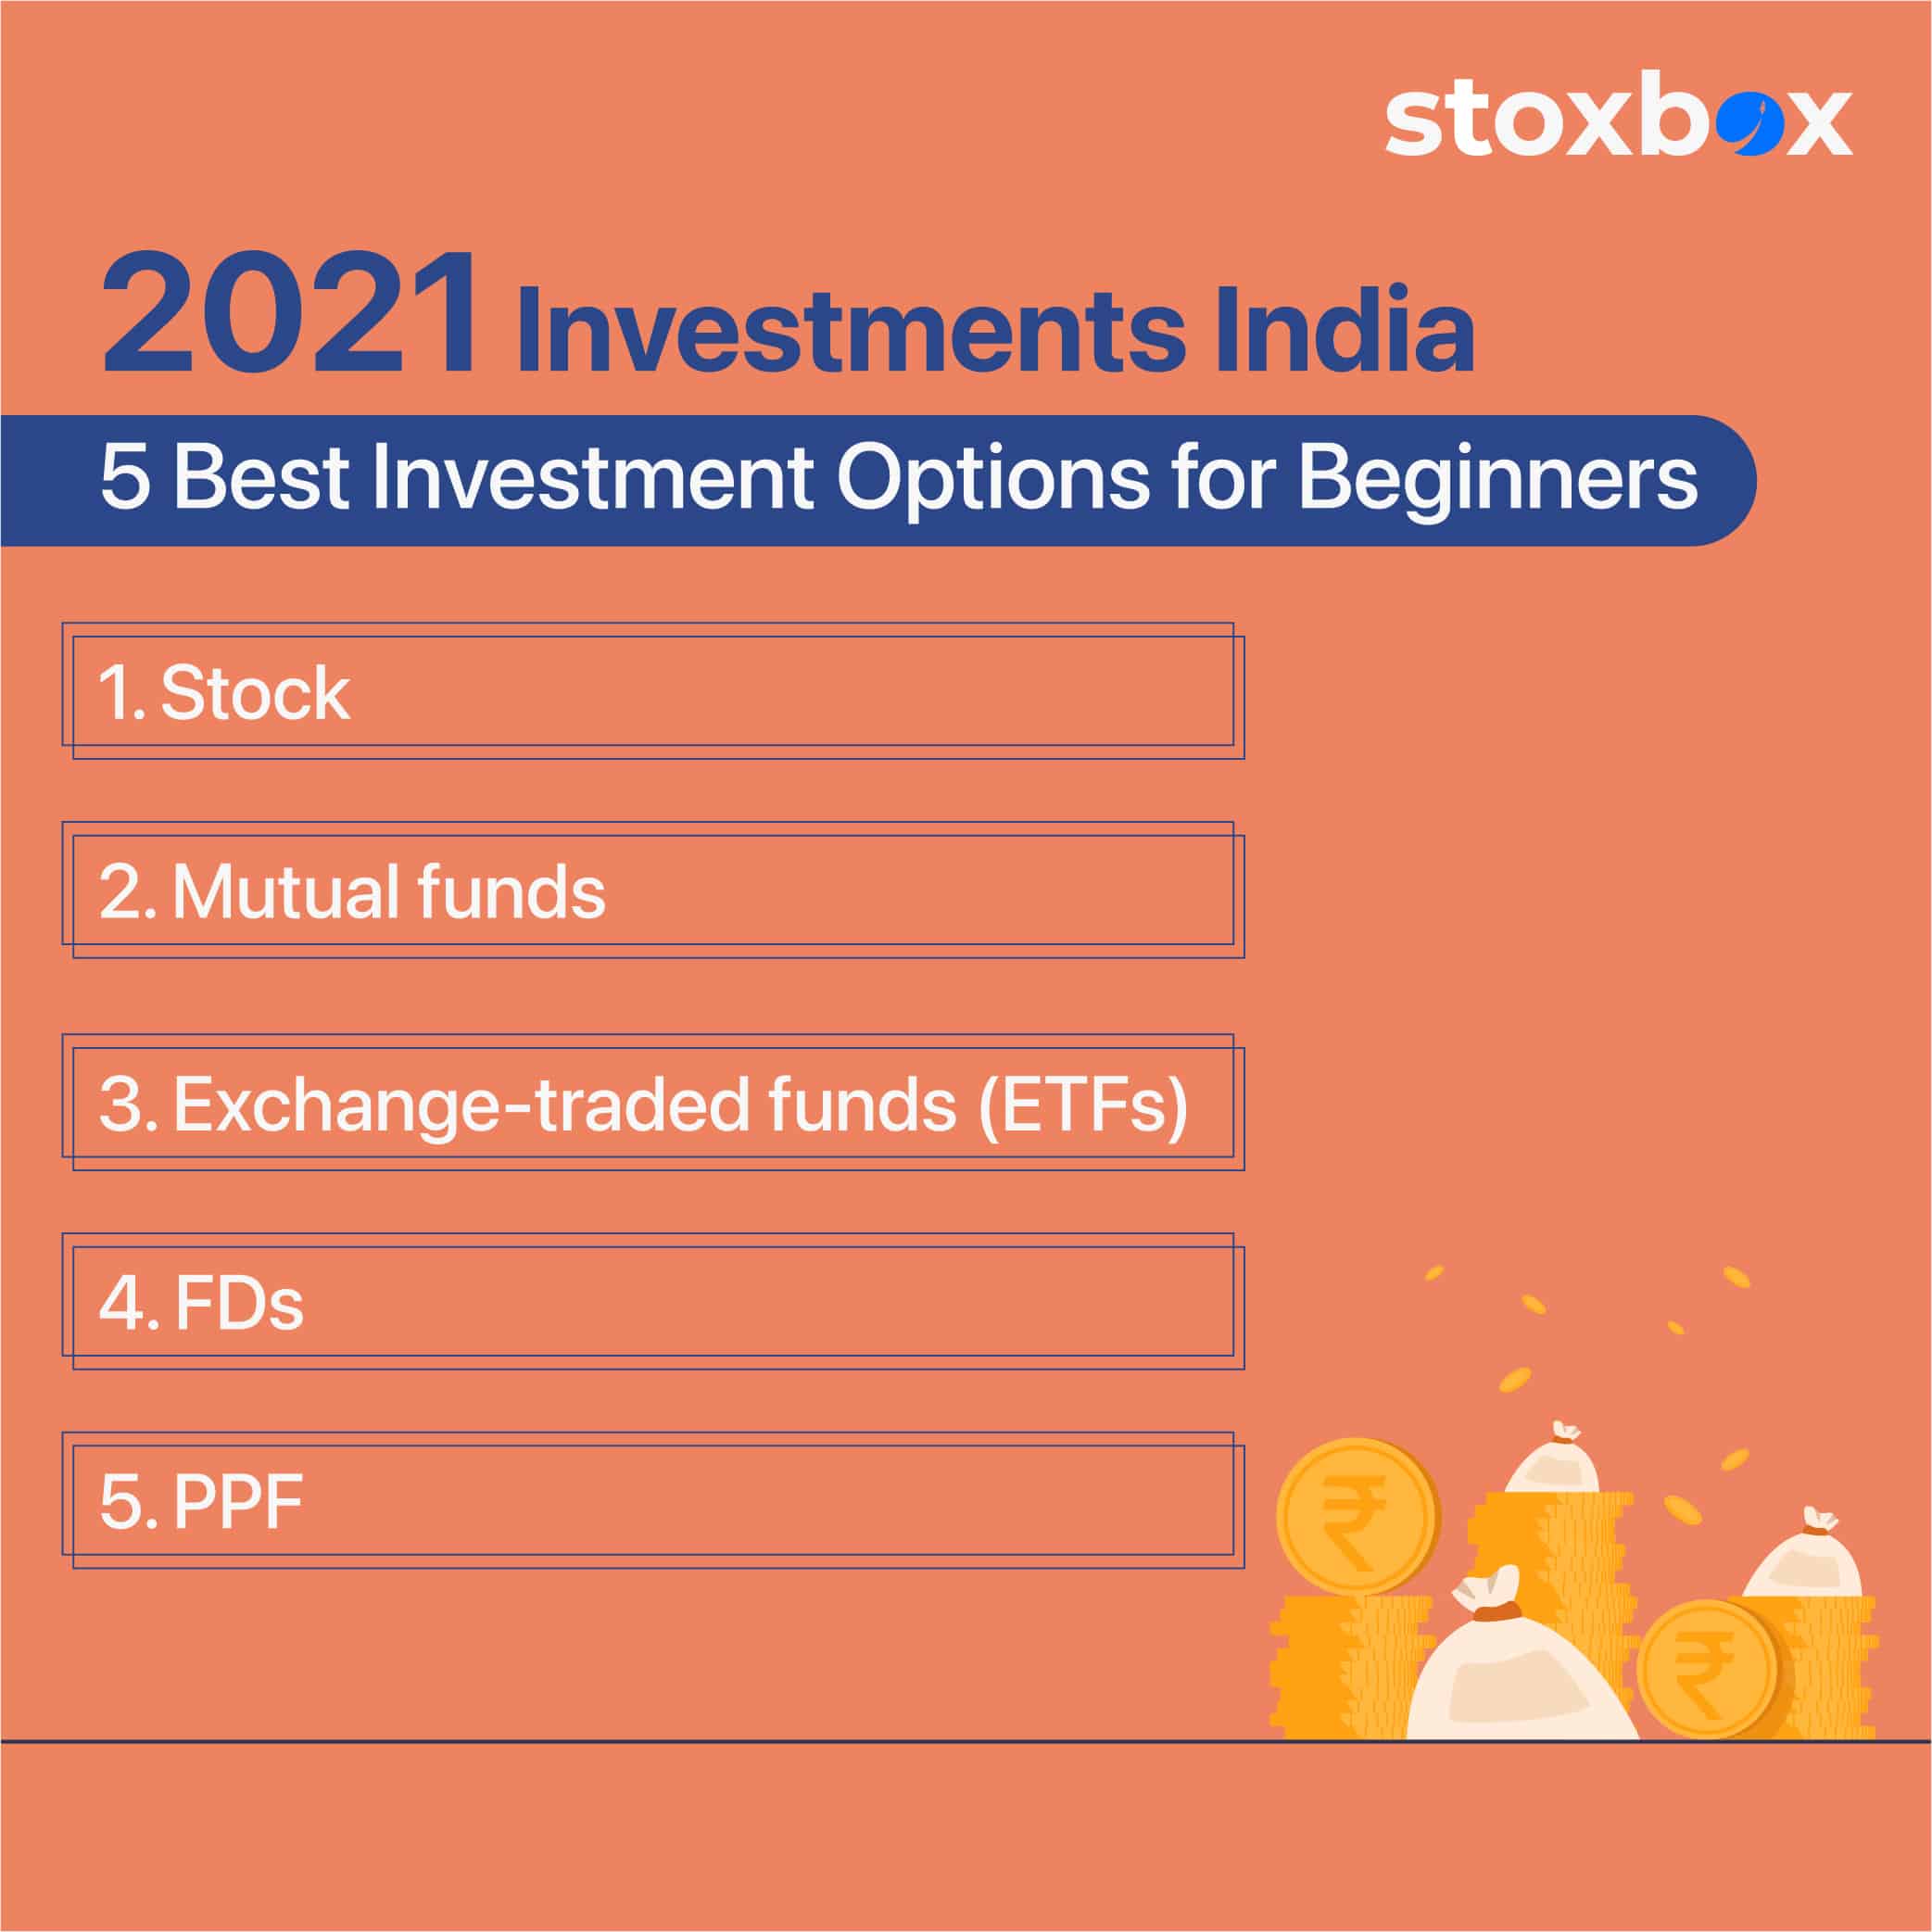 2021 Investments India—5 Best Investing Options and Apps for Beginners